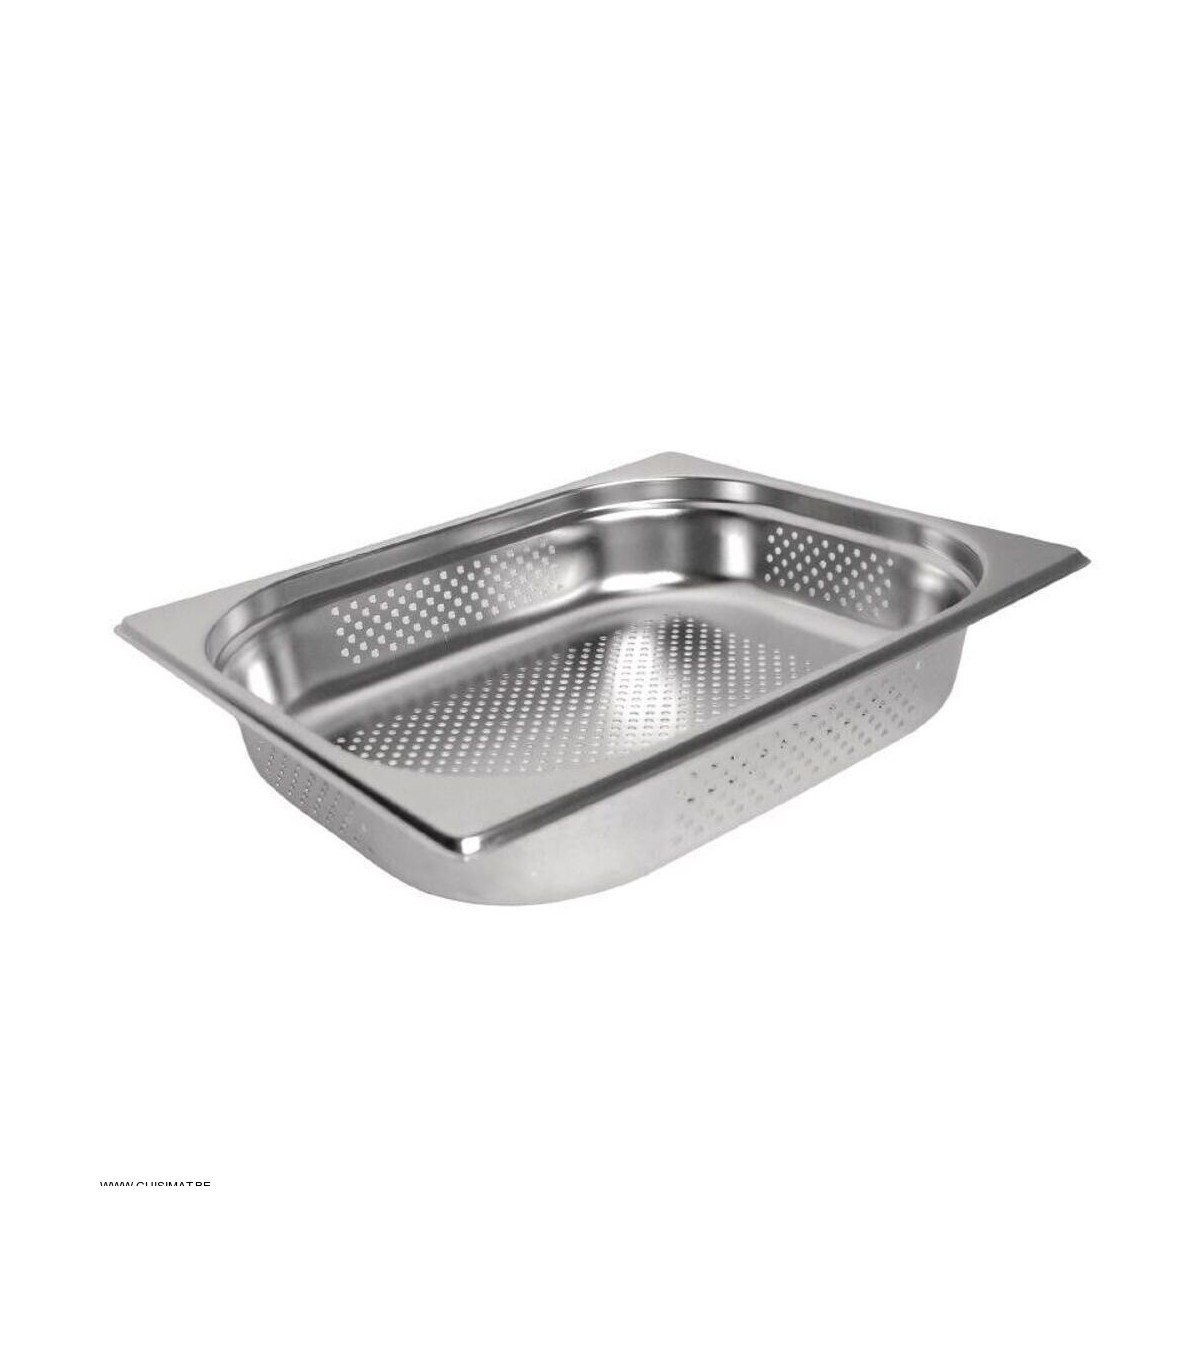 GN 1/2 PERFORE (325 * 265MM) 100 MM  VOGUE dans BACS GASTRONORM ANTI-ADHESIF